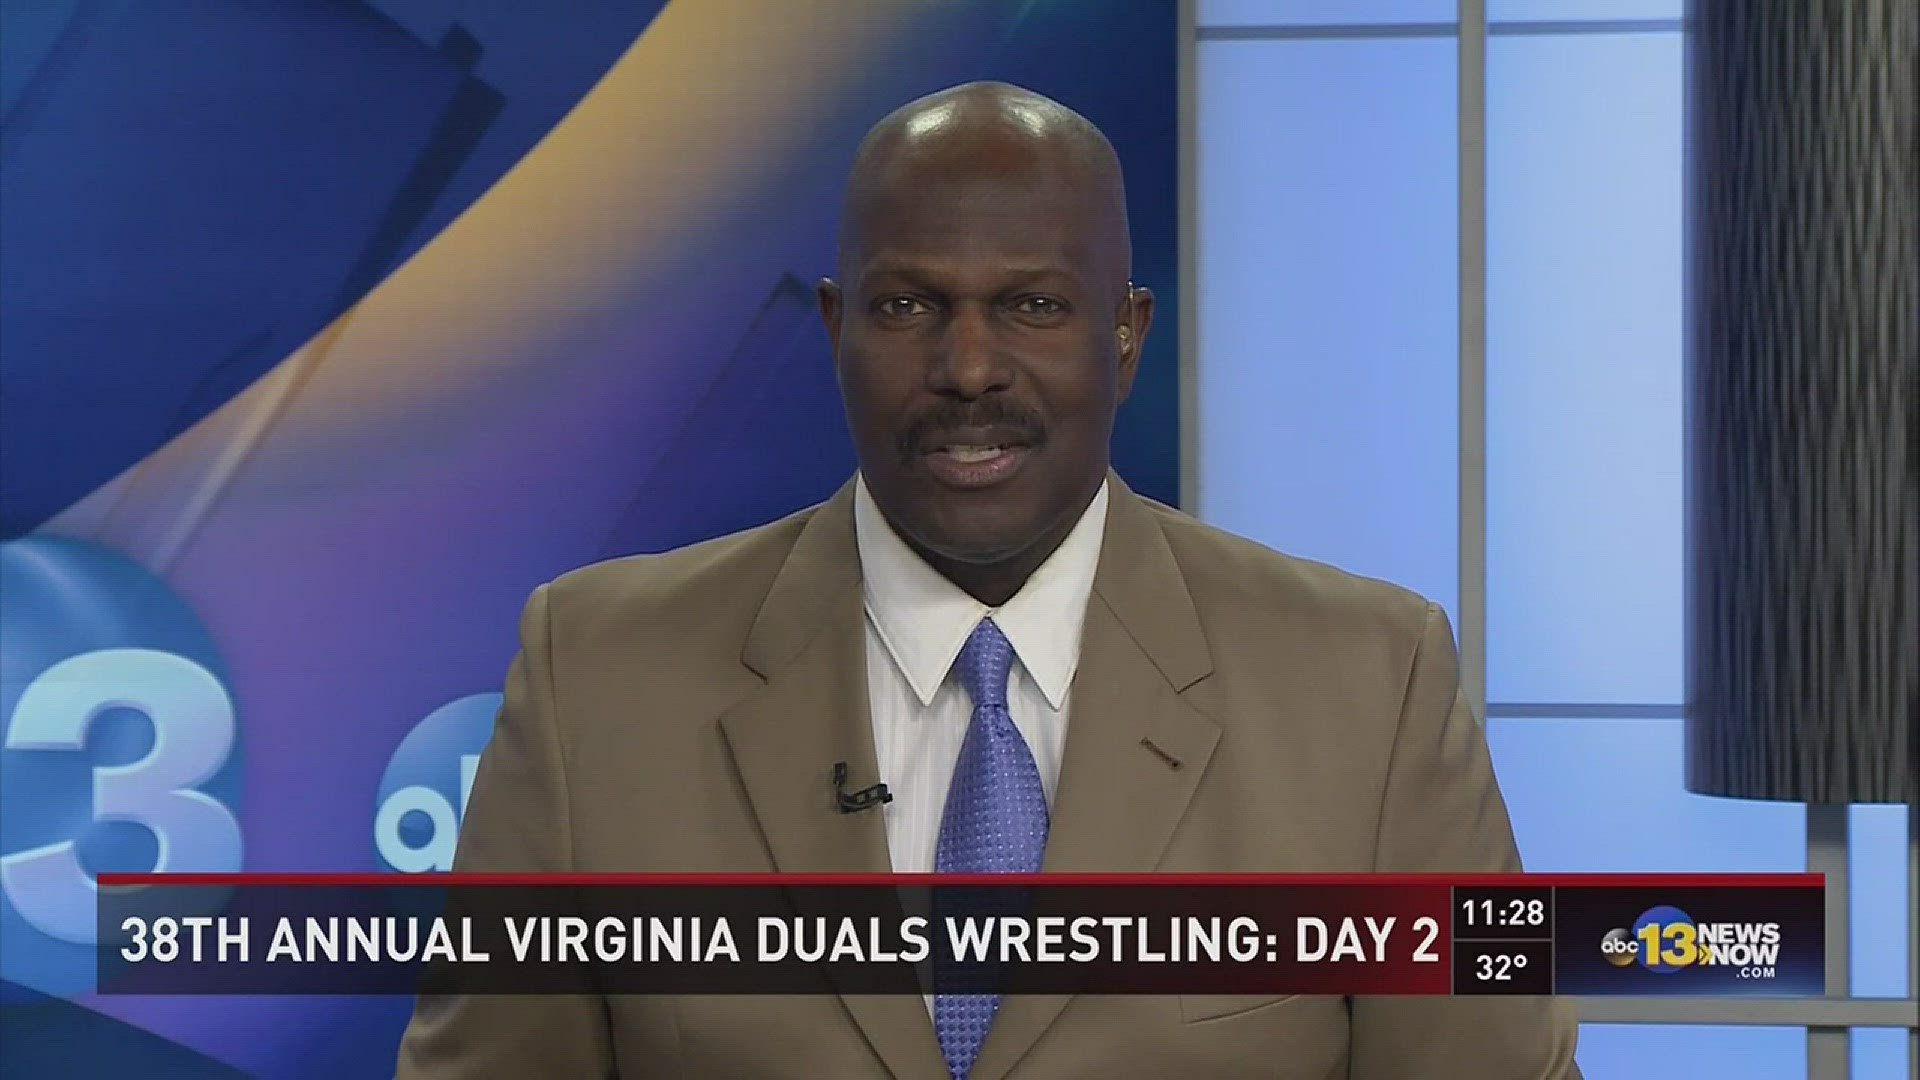 A recap of day 2 of the 38th annual Virginia Duals from the Hampton Coliseum.